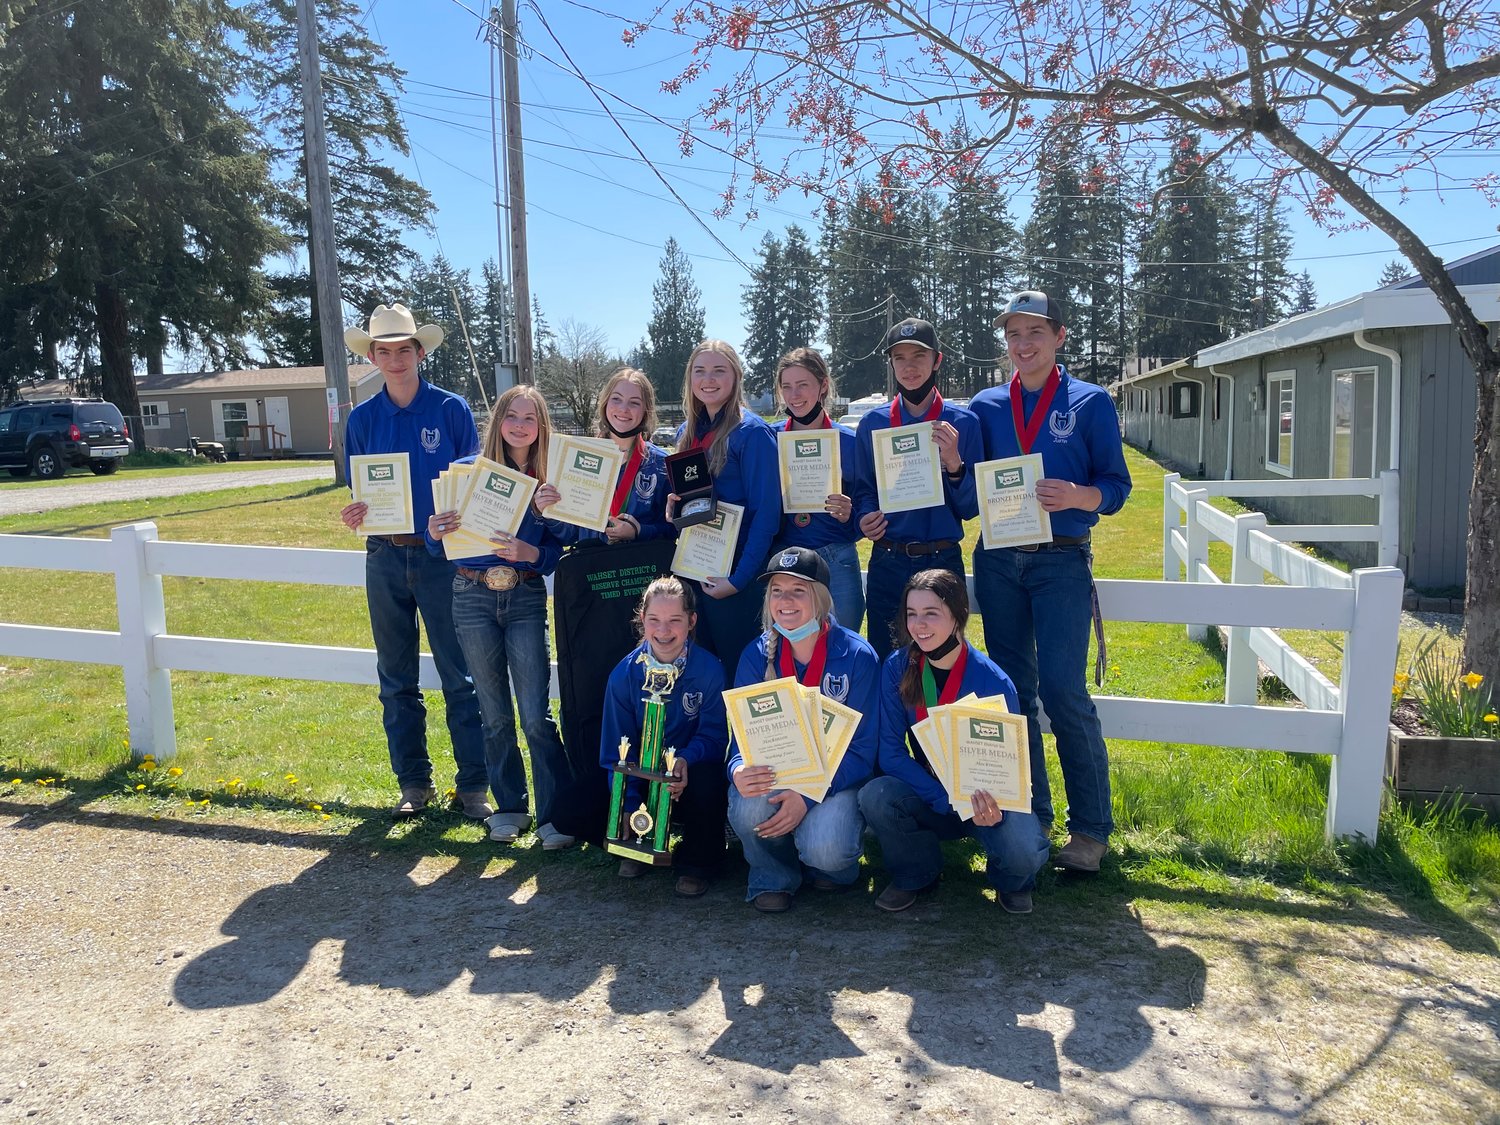 The Washington High School Equestrian Team at Hockinson High School ended their season with a multitude of medals and state qualifiers.